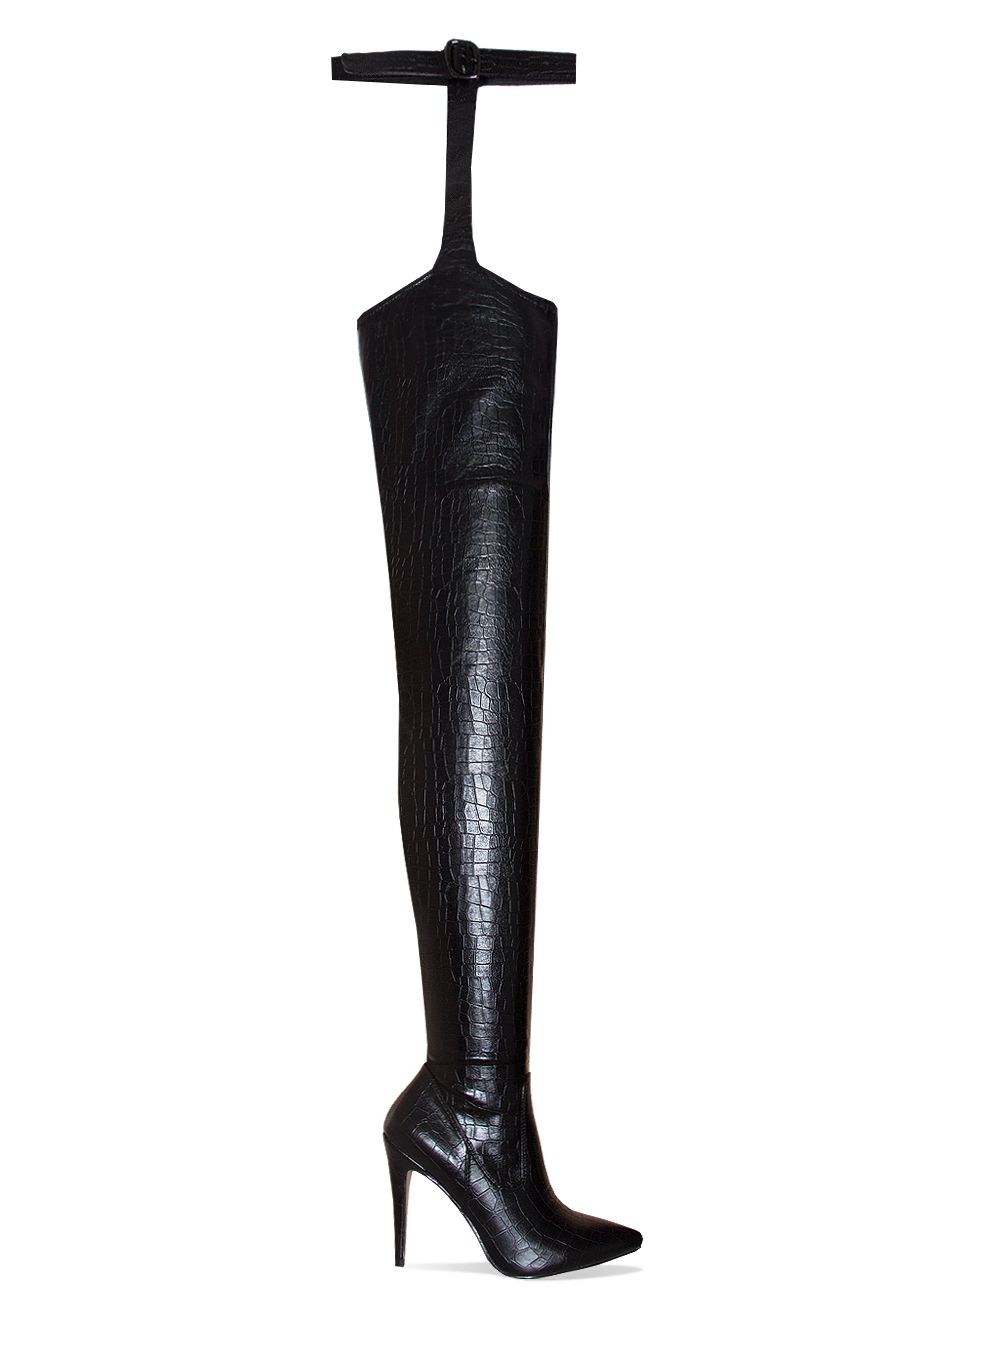 thigh high boots with belt attached